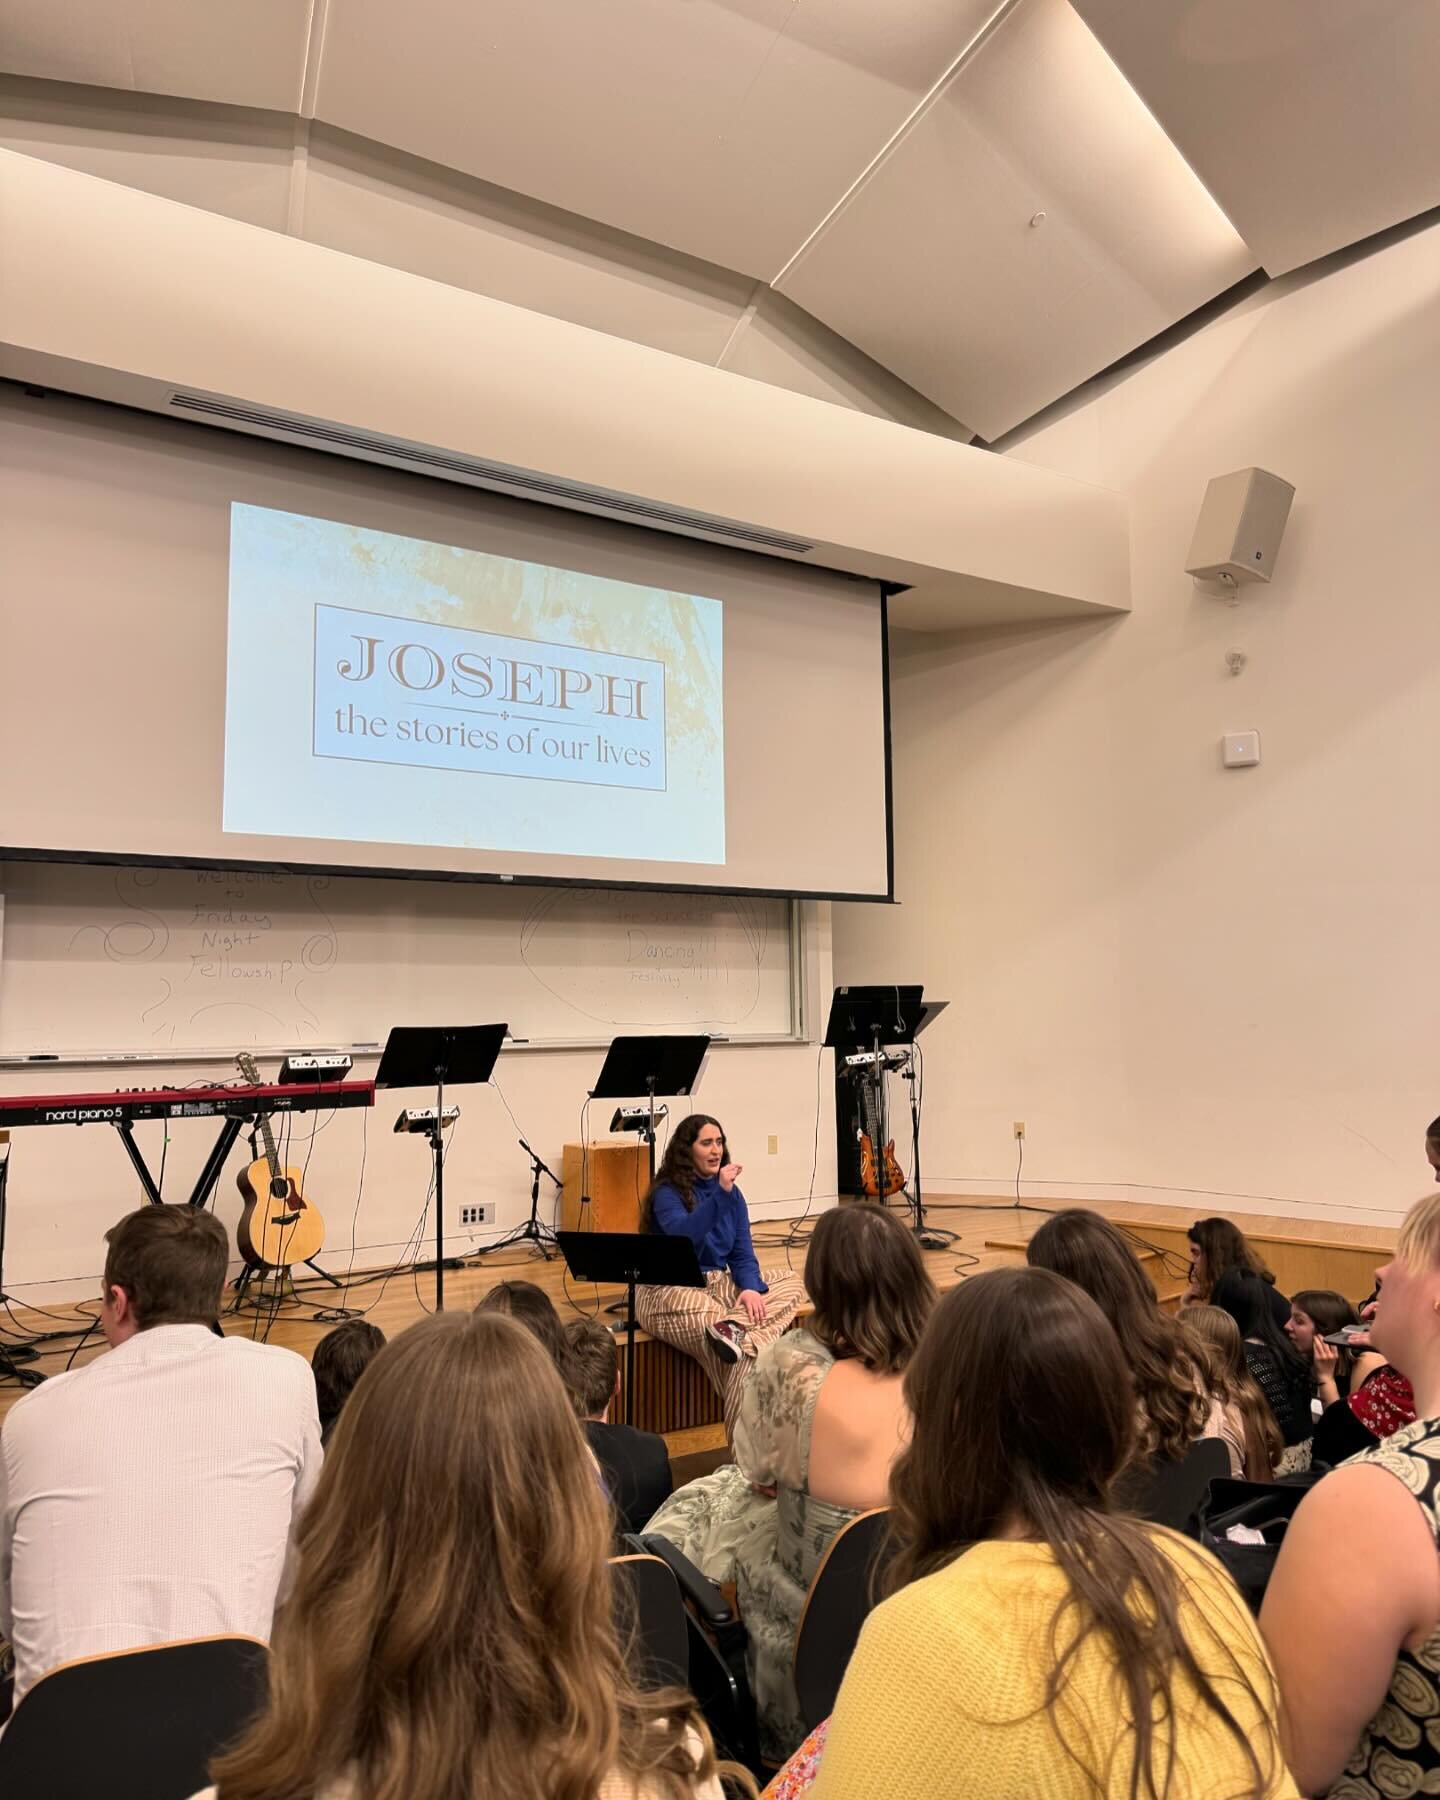 Here&rsquo;s a lil recap of last Friday🥳 what a sweet time it was to have a epic story time with Rachel to finish our &ldquo;Joseph - Stories of Our Lives&rdquo; series! And then huge shout out to our club president, interns, and students who planne